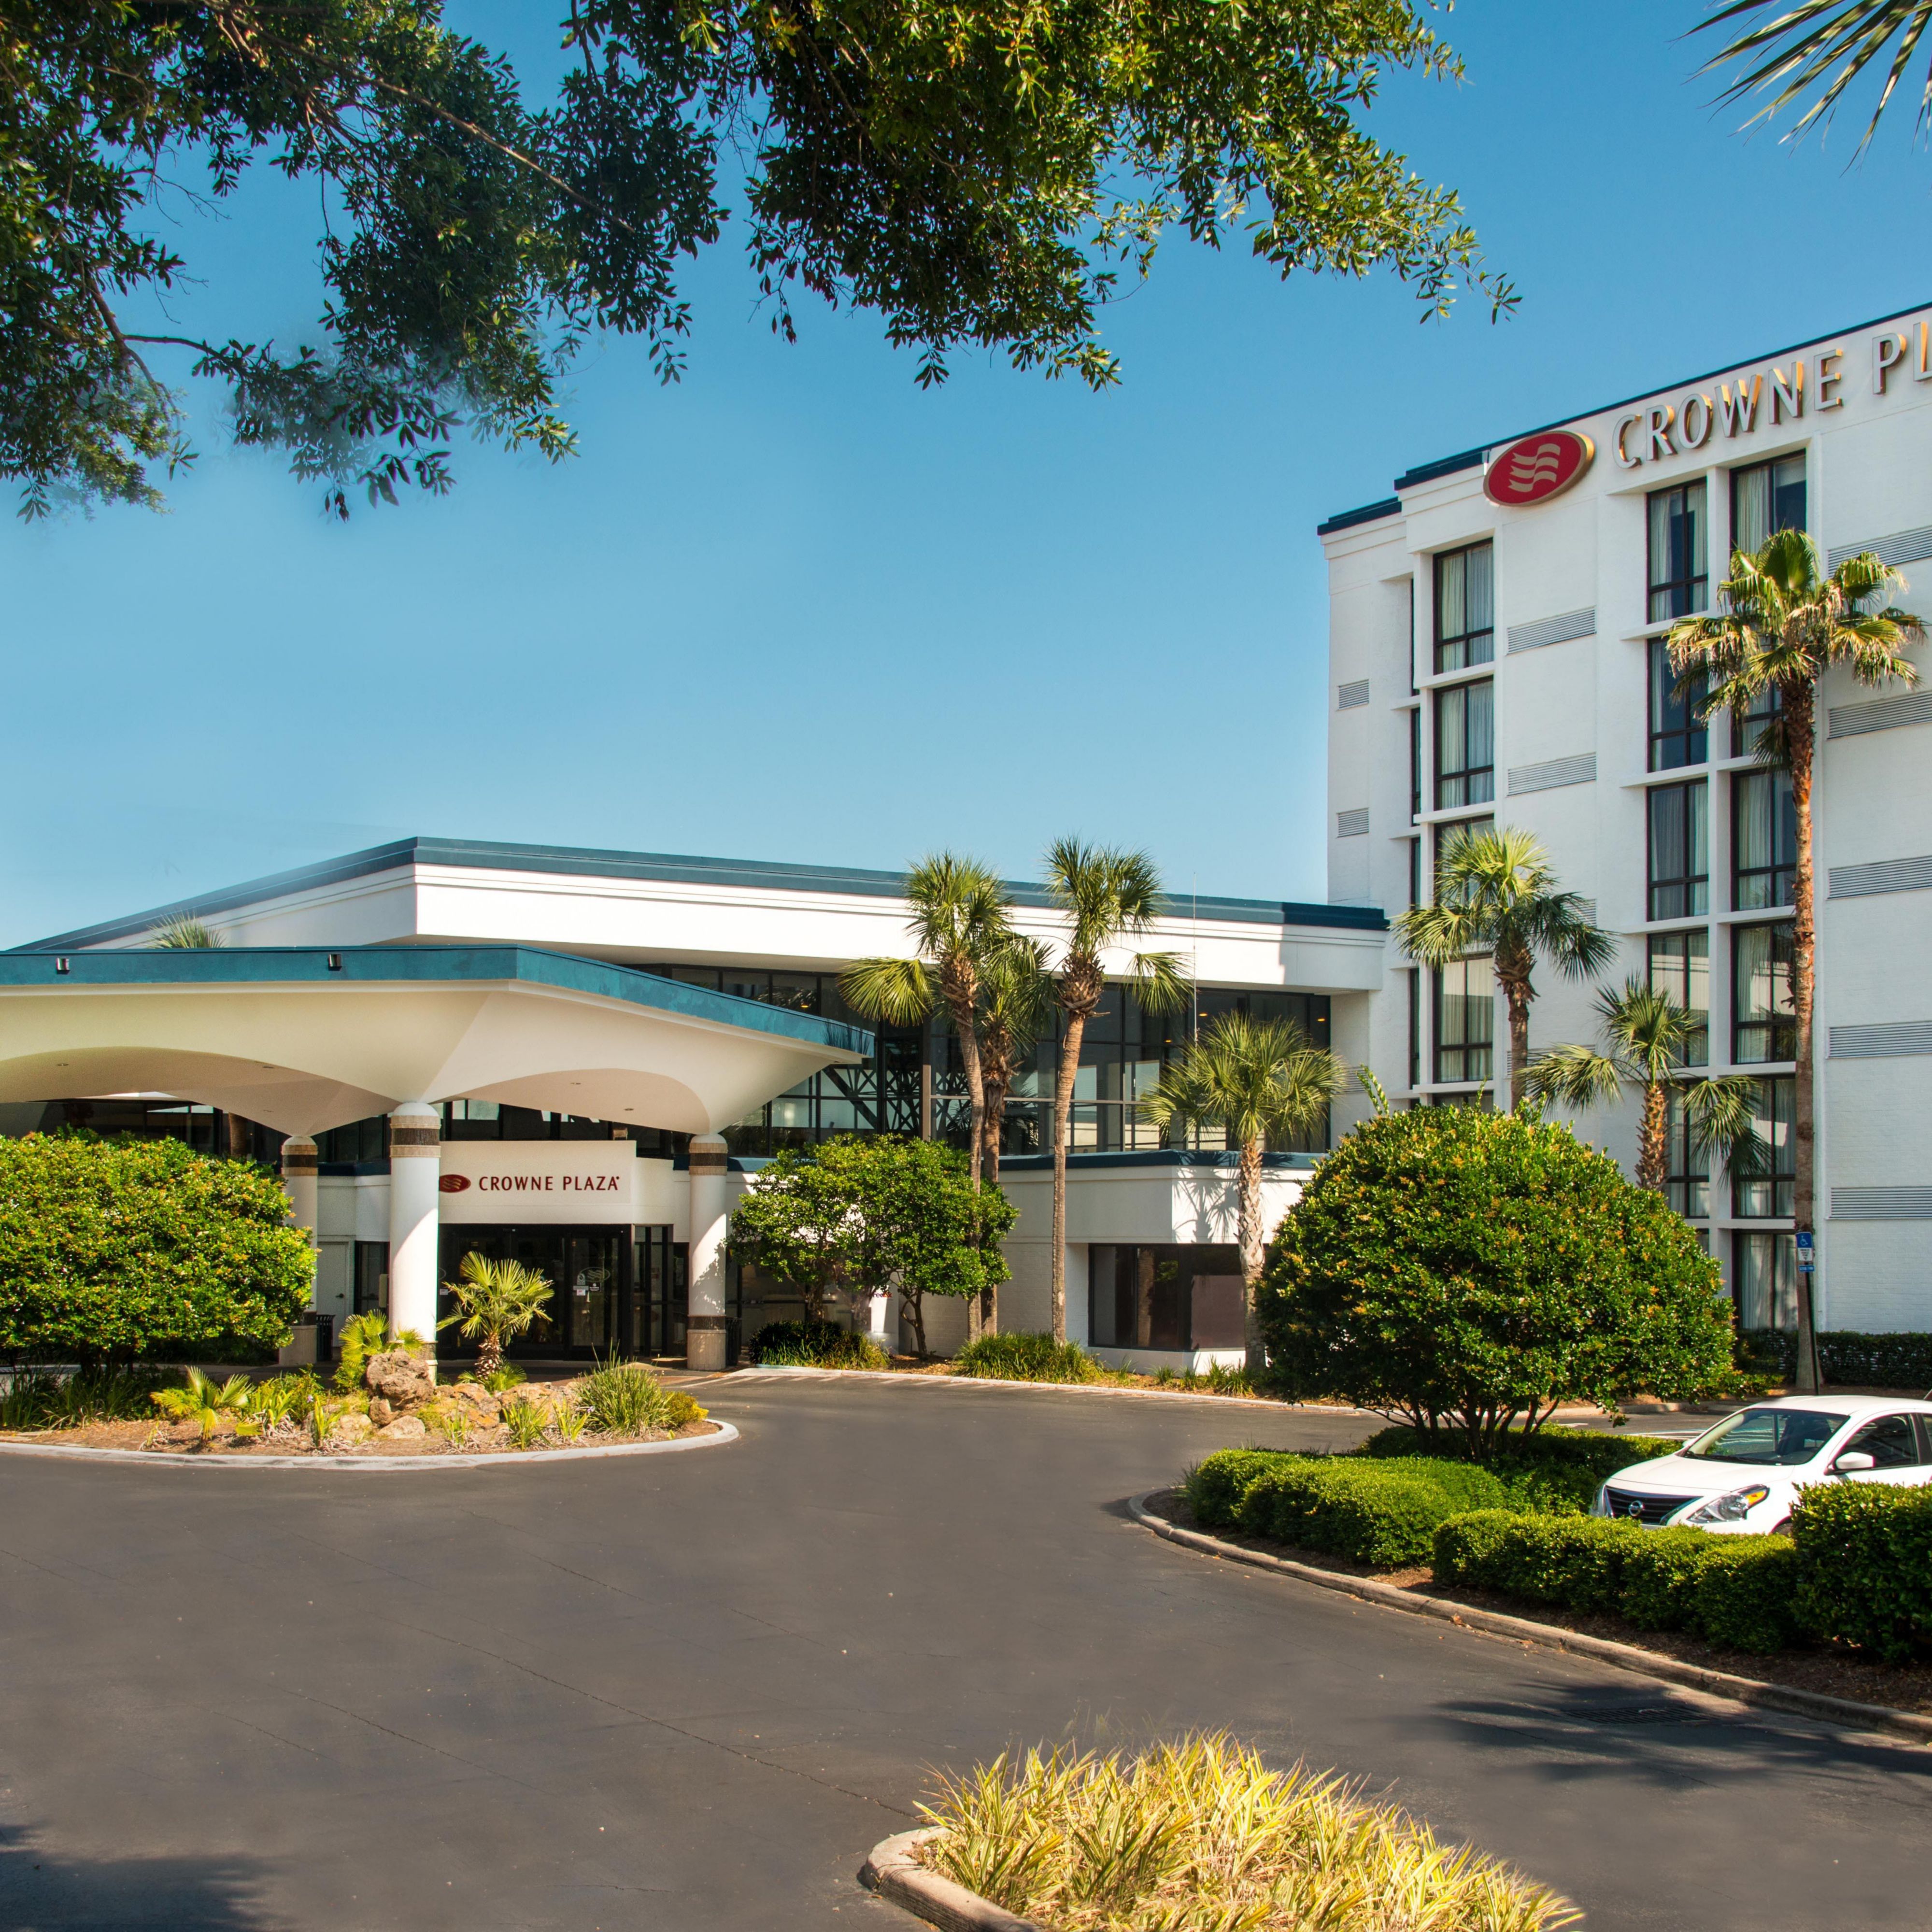 Stay at Crowne Plaza Jacksonville hotel located near the airport.